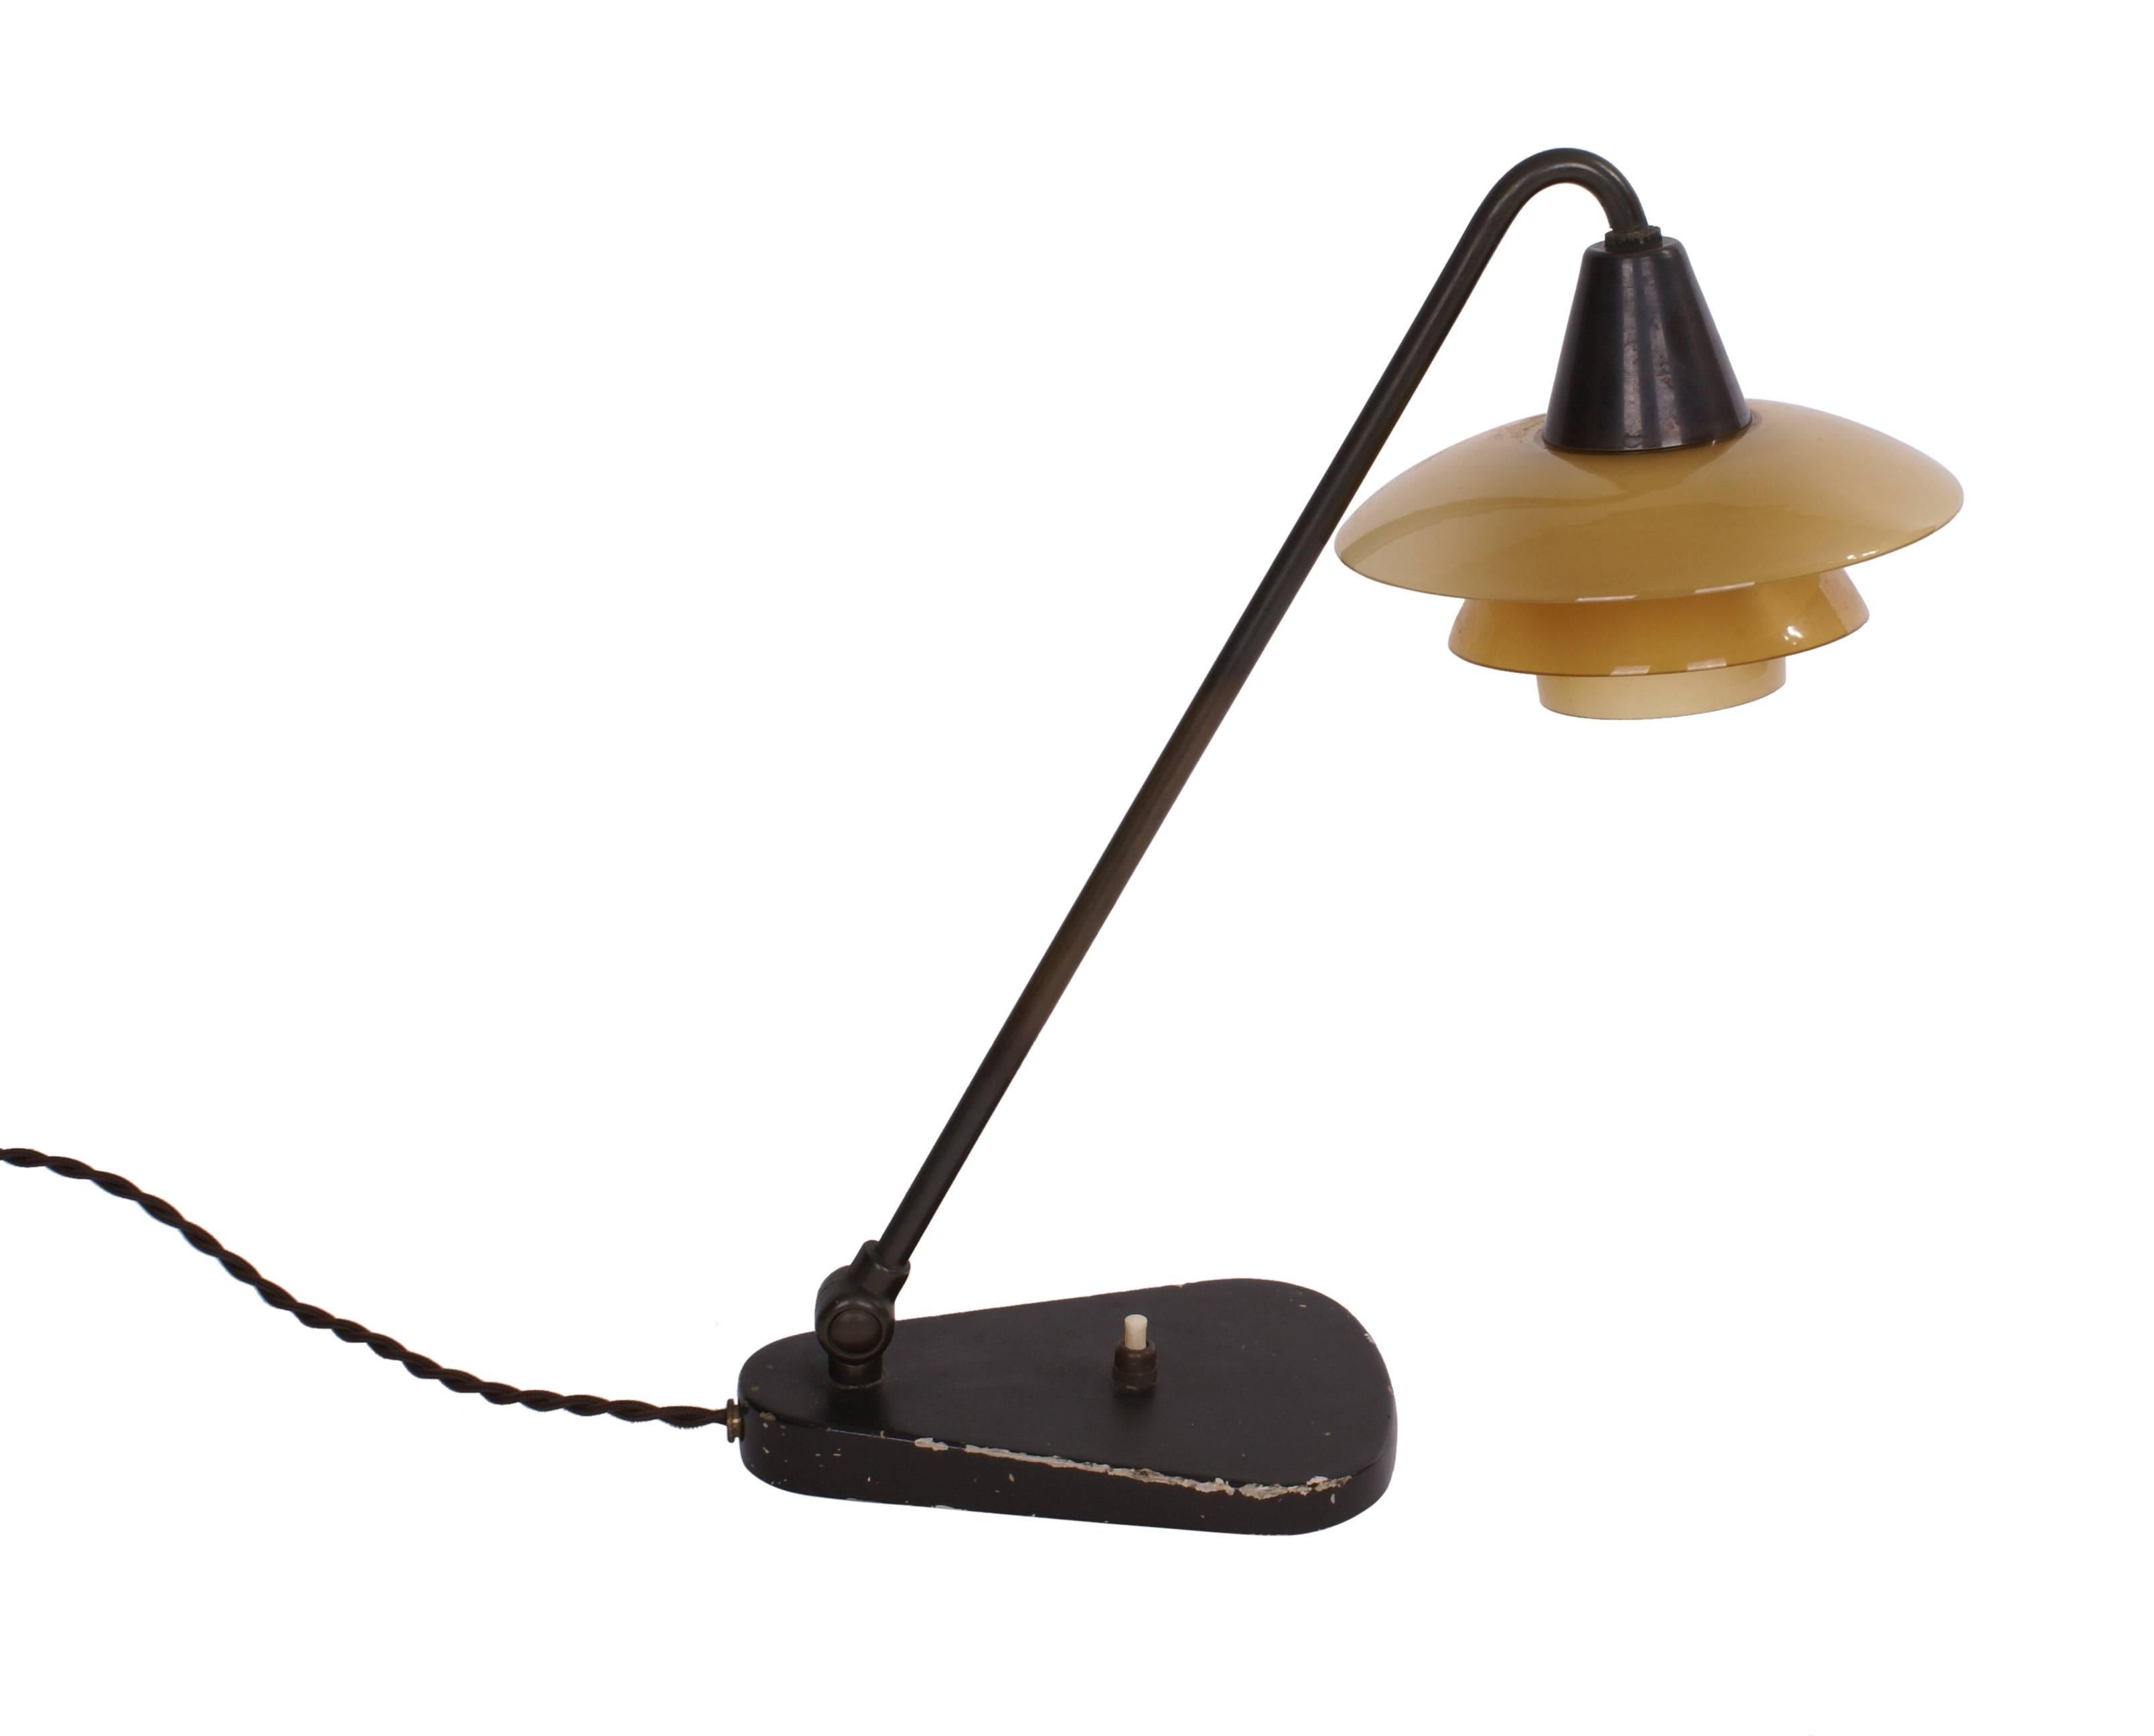 Piano lamp by Poul Henningsen. Made by Louis Poulsen in the 1940s. Stamped 